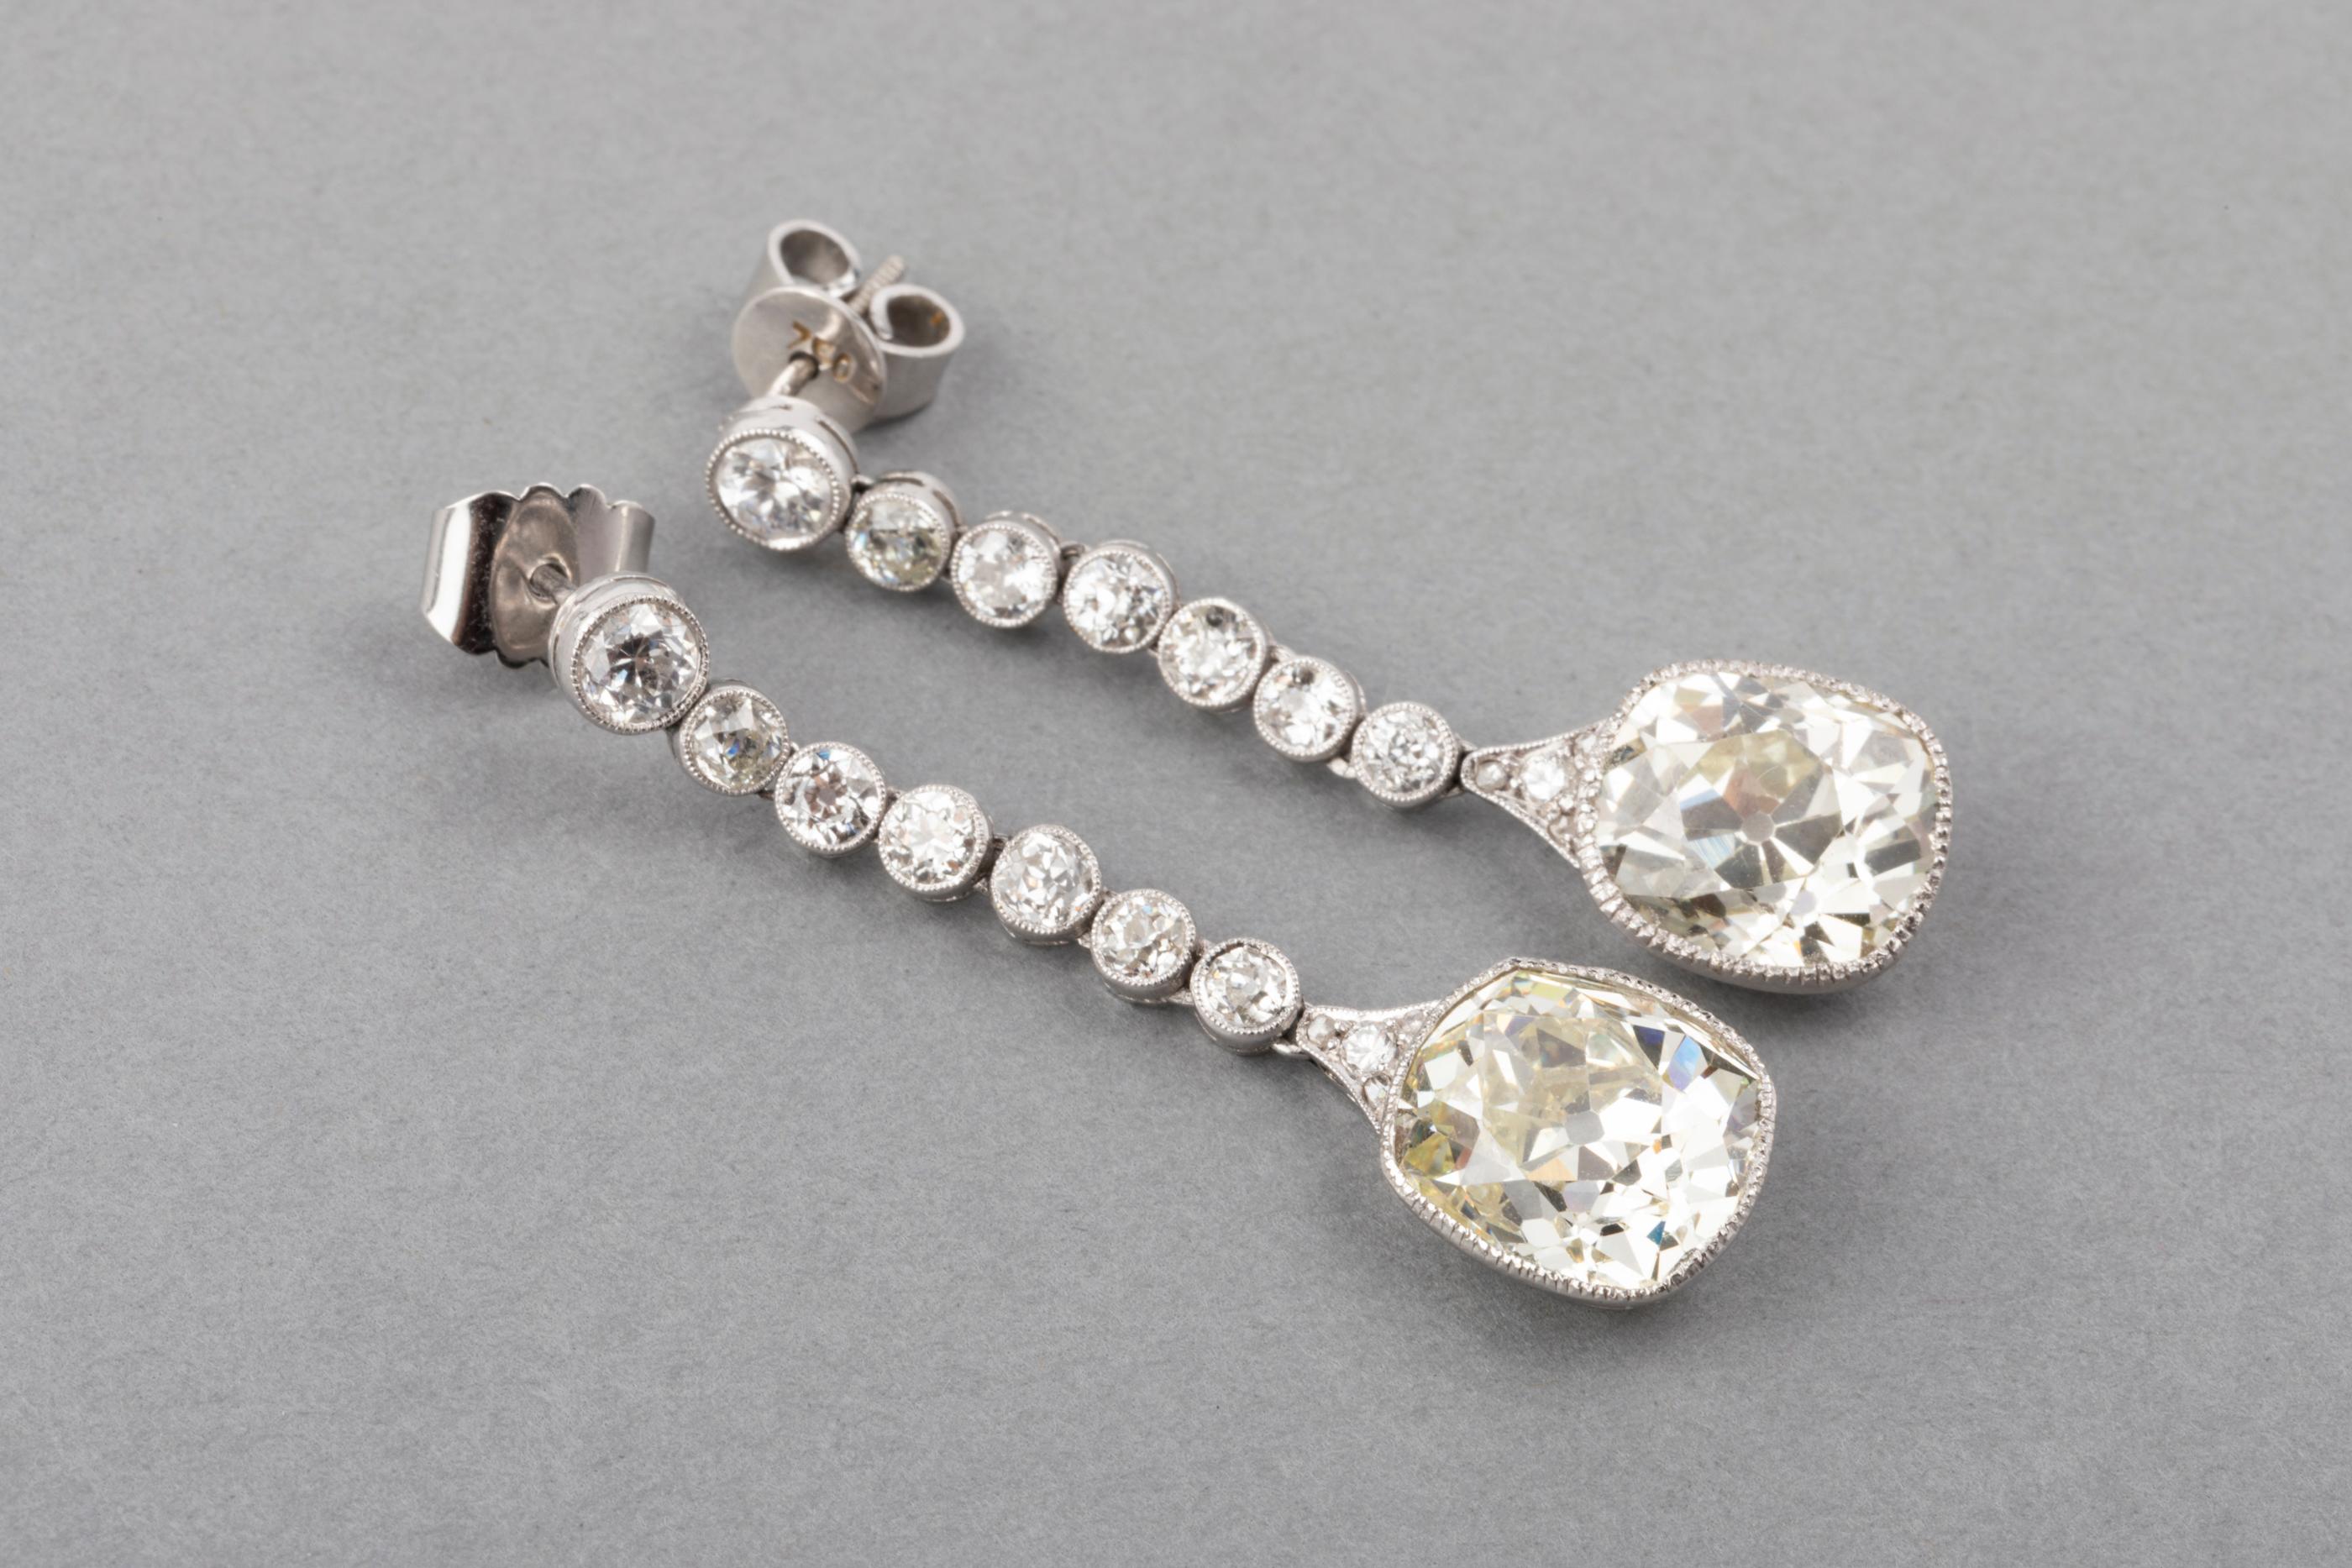 13 Carats Diamonds French Art Deco Earrings

Very beautiful pair or earrings, made in France circa 1920.
They are elegant. 
The two principal cushion cut diamonds weights 5.65 and 5.45 carats exactly. 
The colour is L/M estimate and Vs1 clarity. The